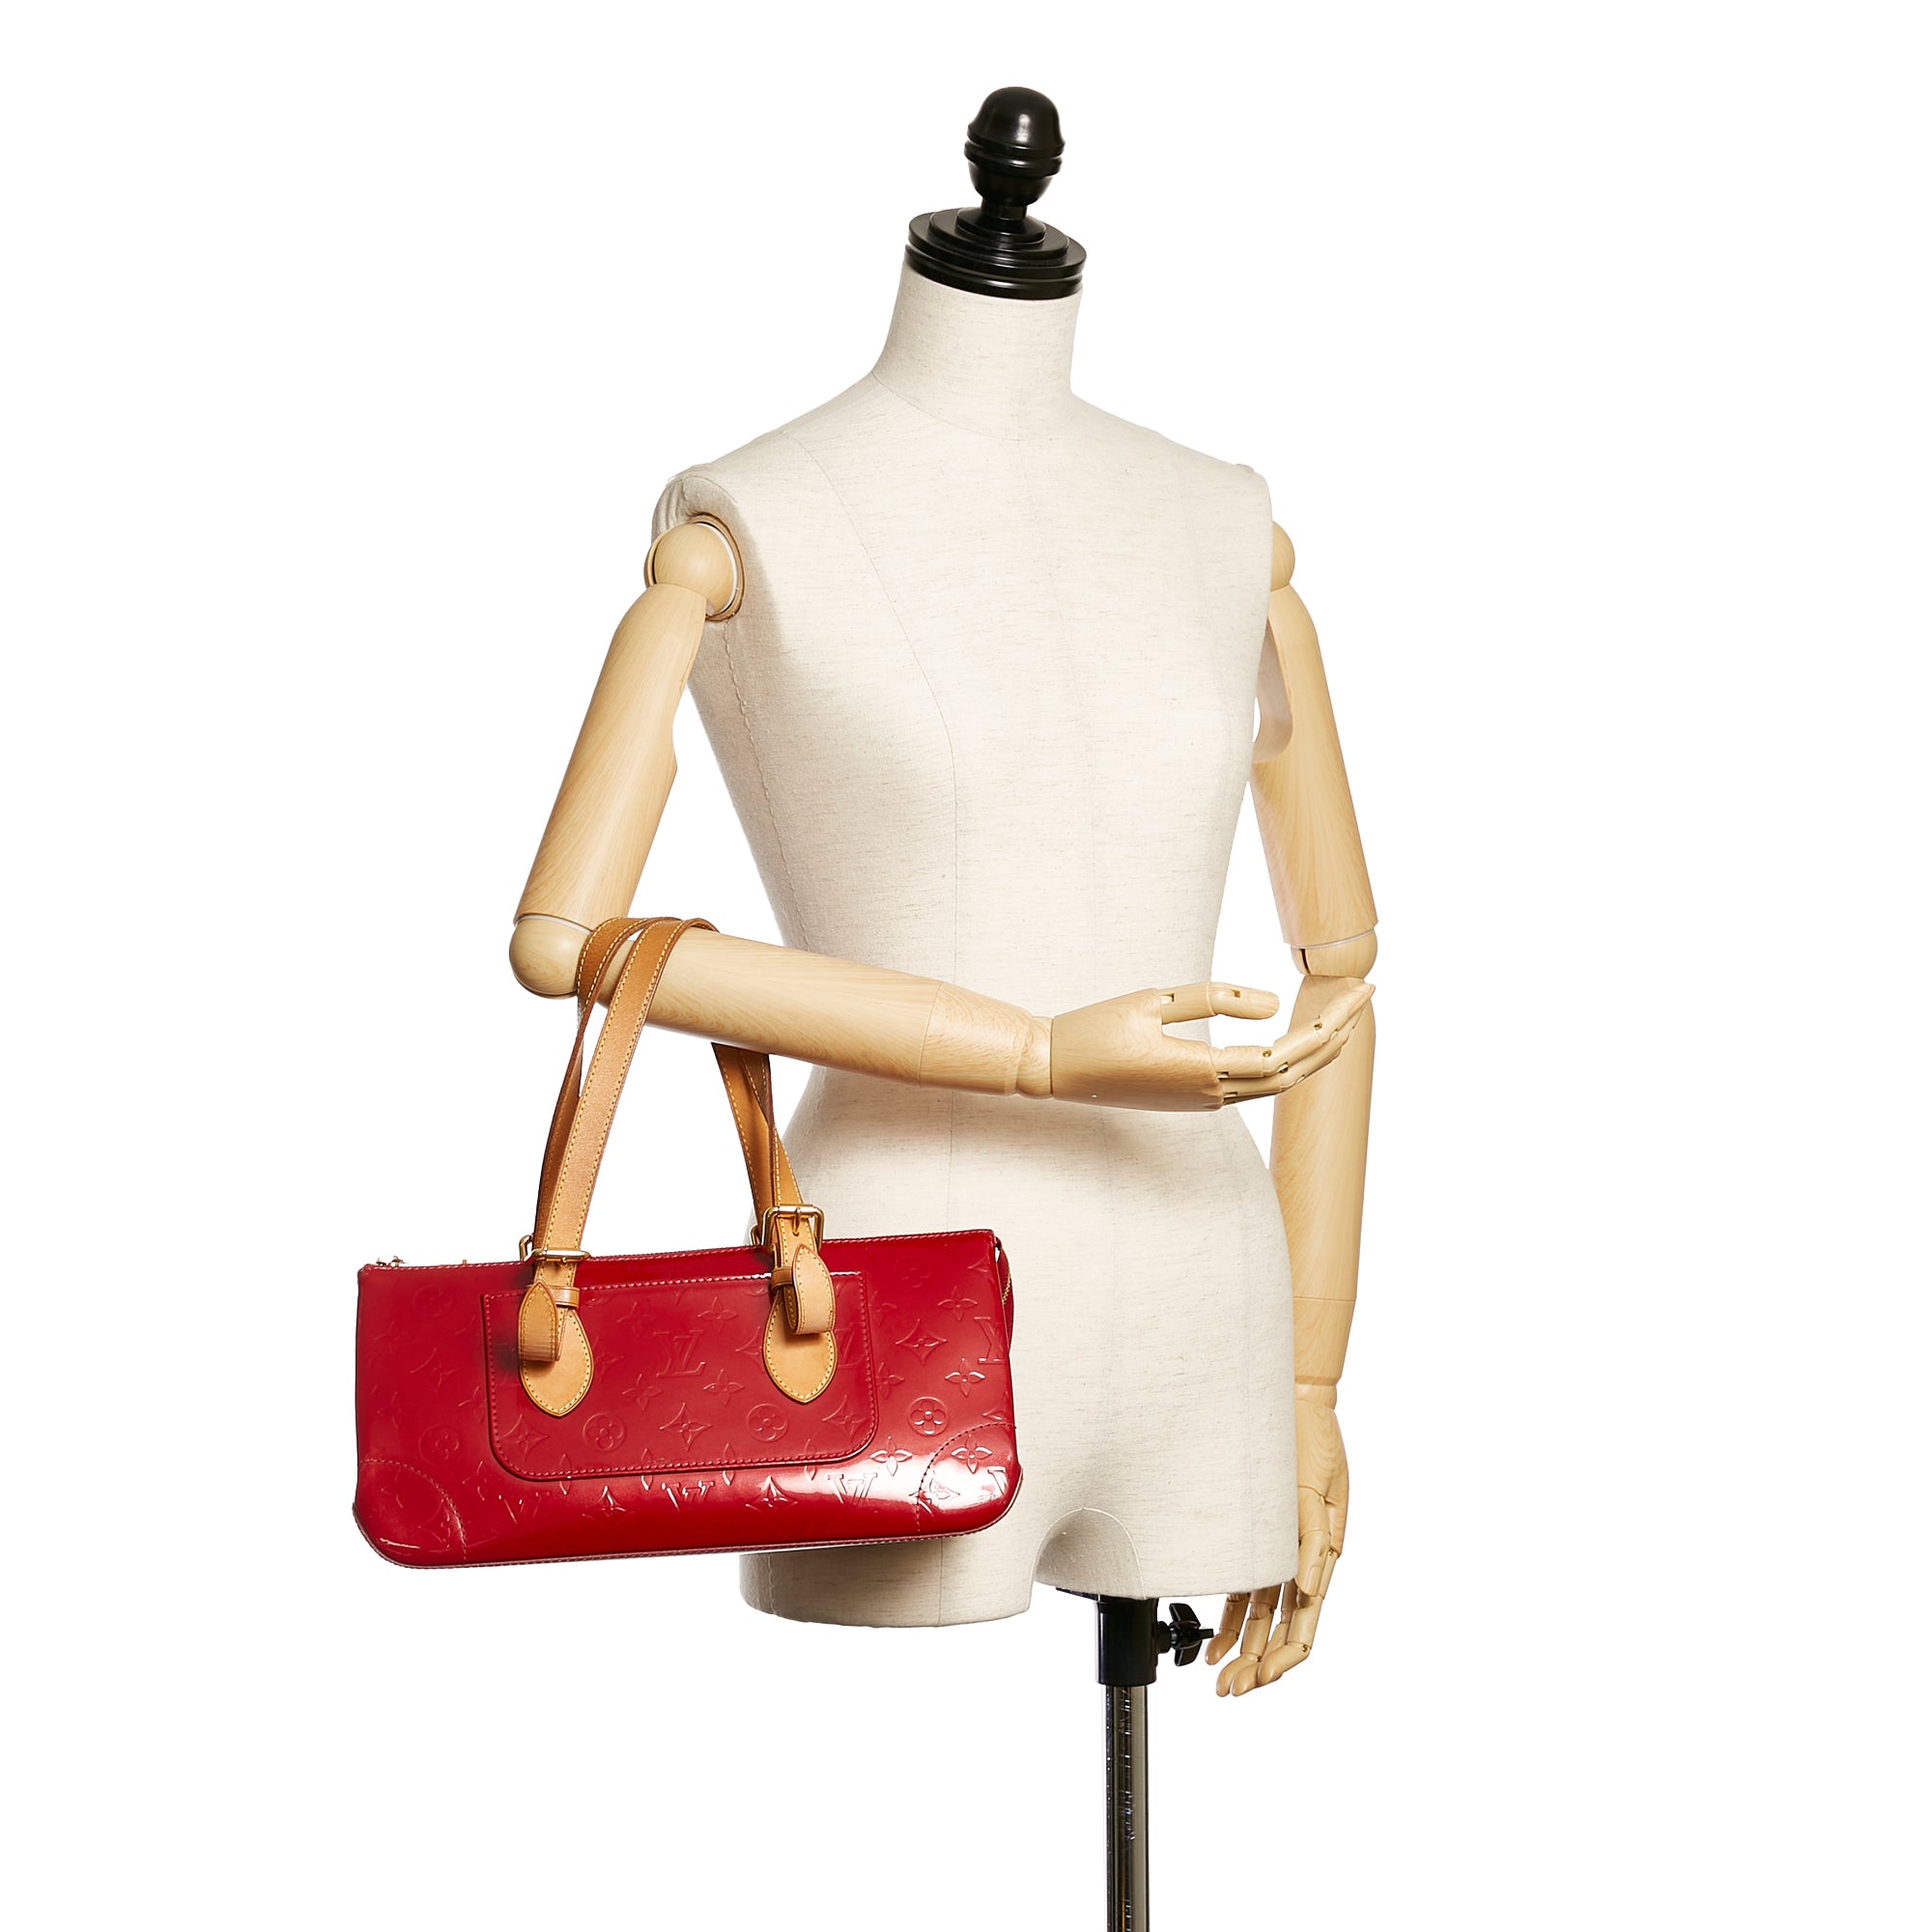 Red Louis Vuitton Vernis Rosewood Bag, RvceShops Revival